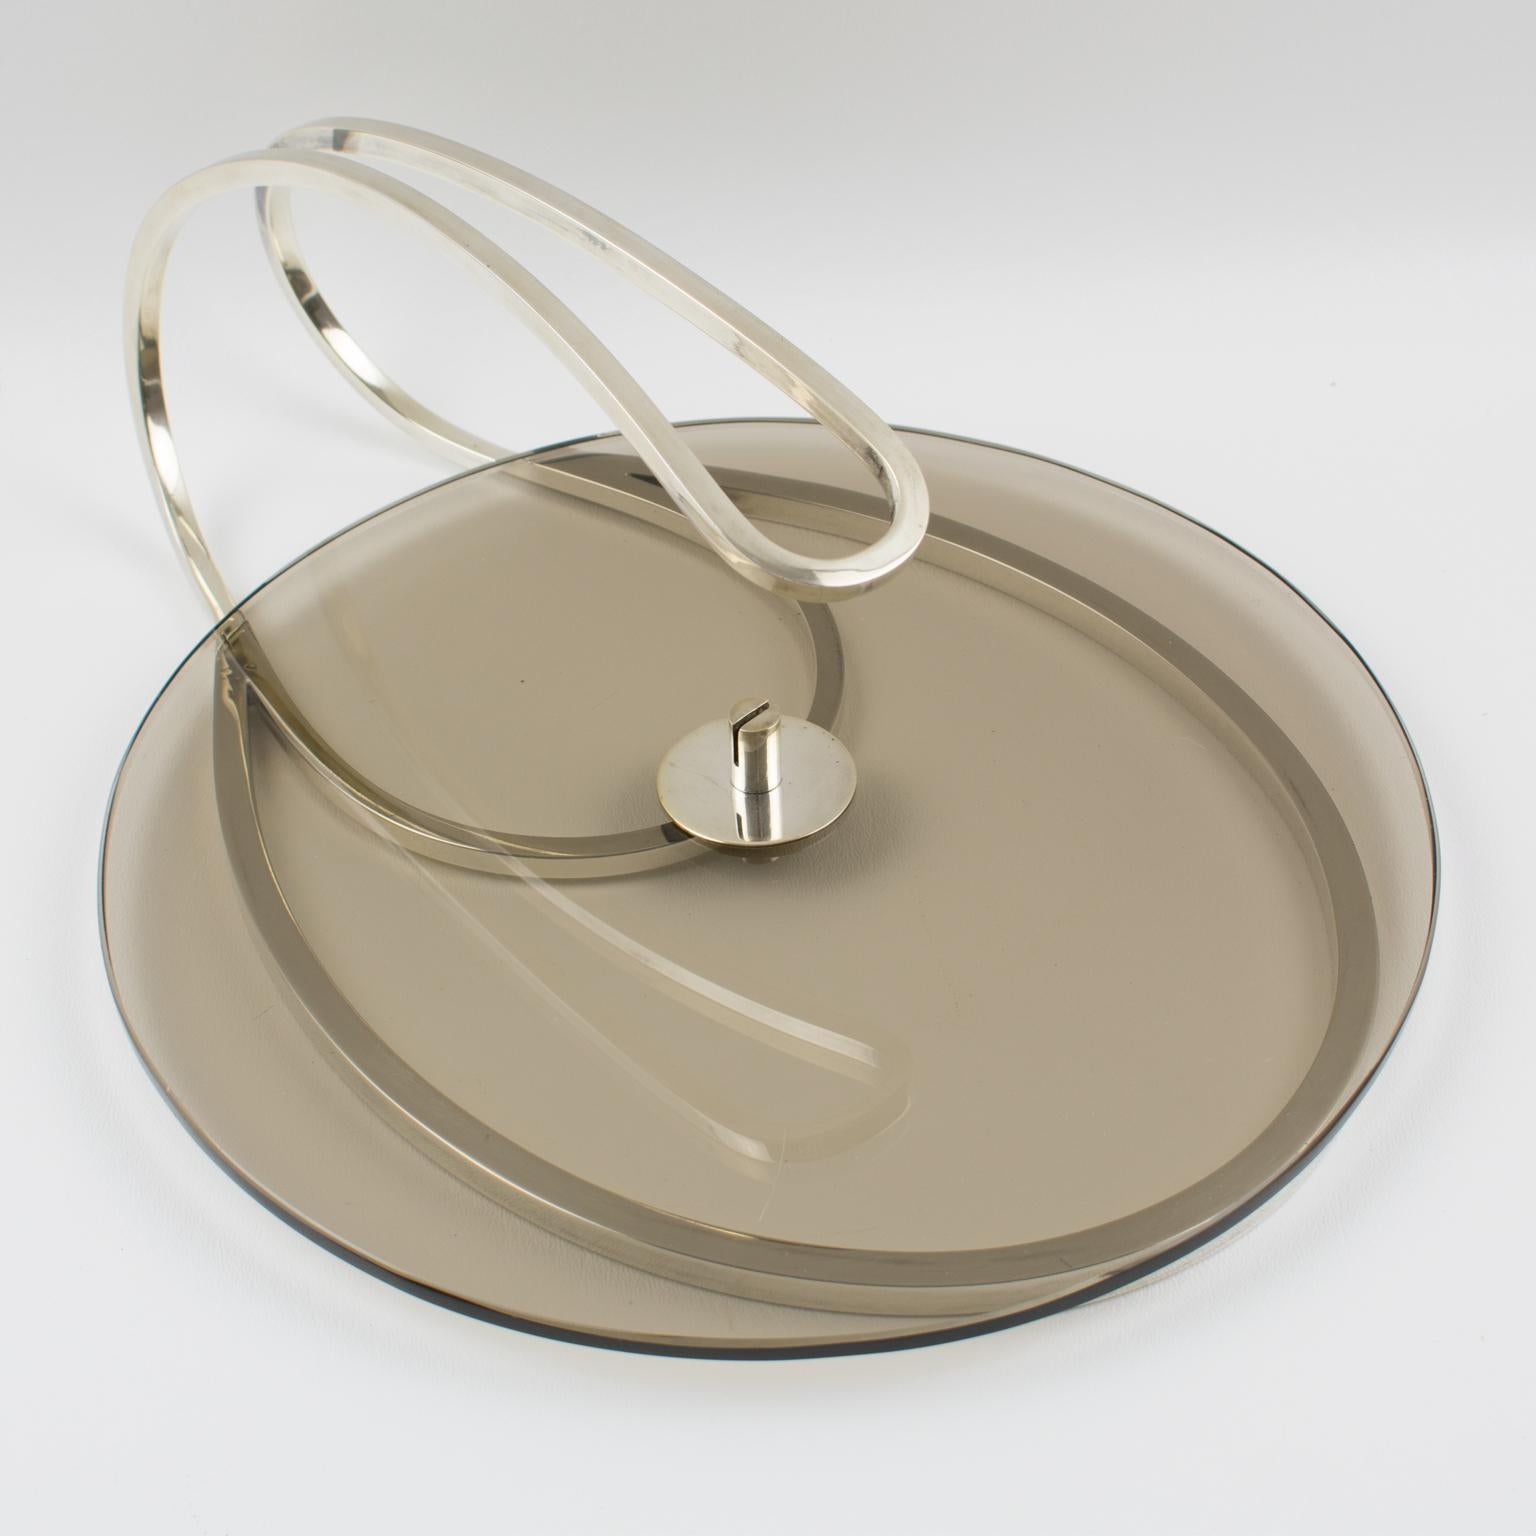 Late 20th Century Cheese Tray Board Platter Silver Plate and Glass by Produx, Paris For Sale